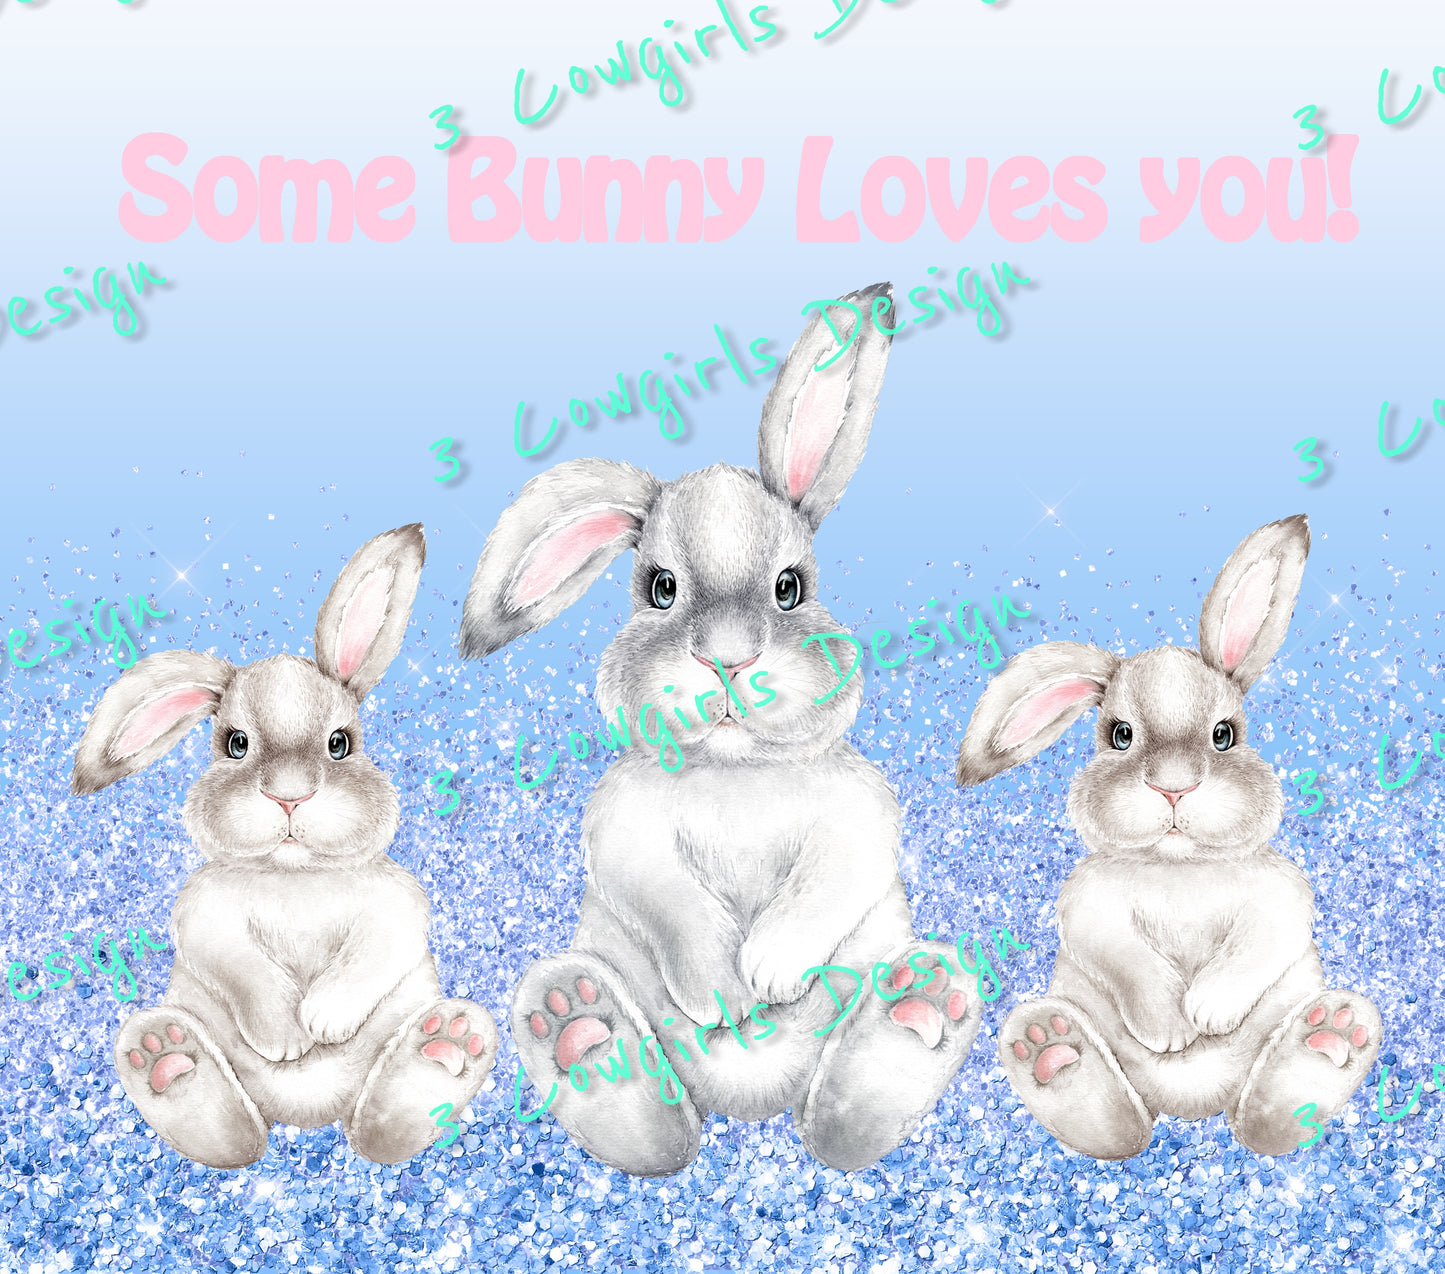 20 Some bunny loves you #3